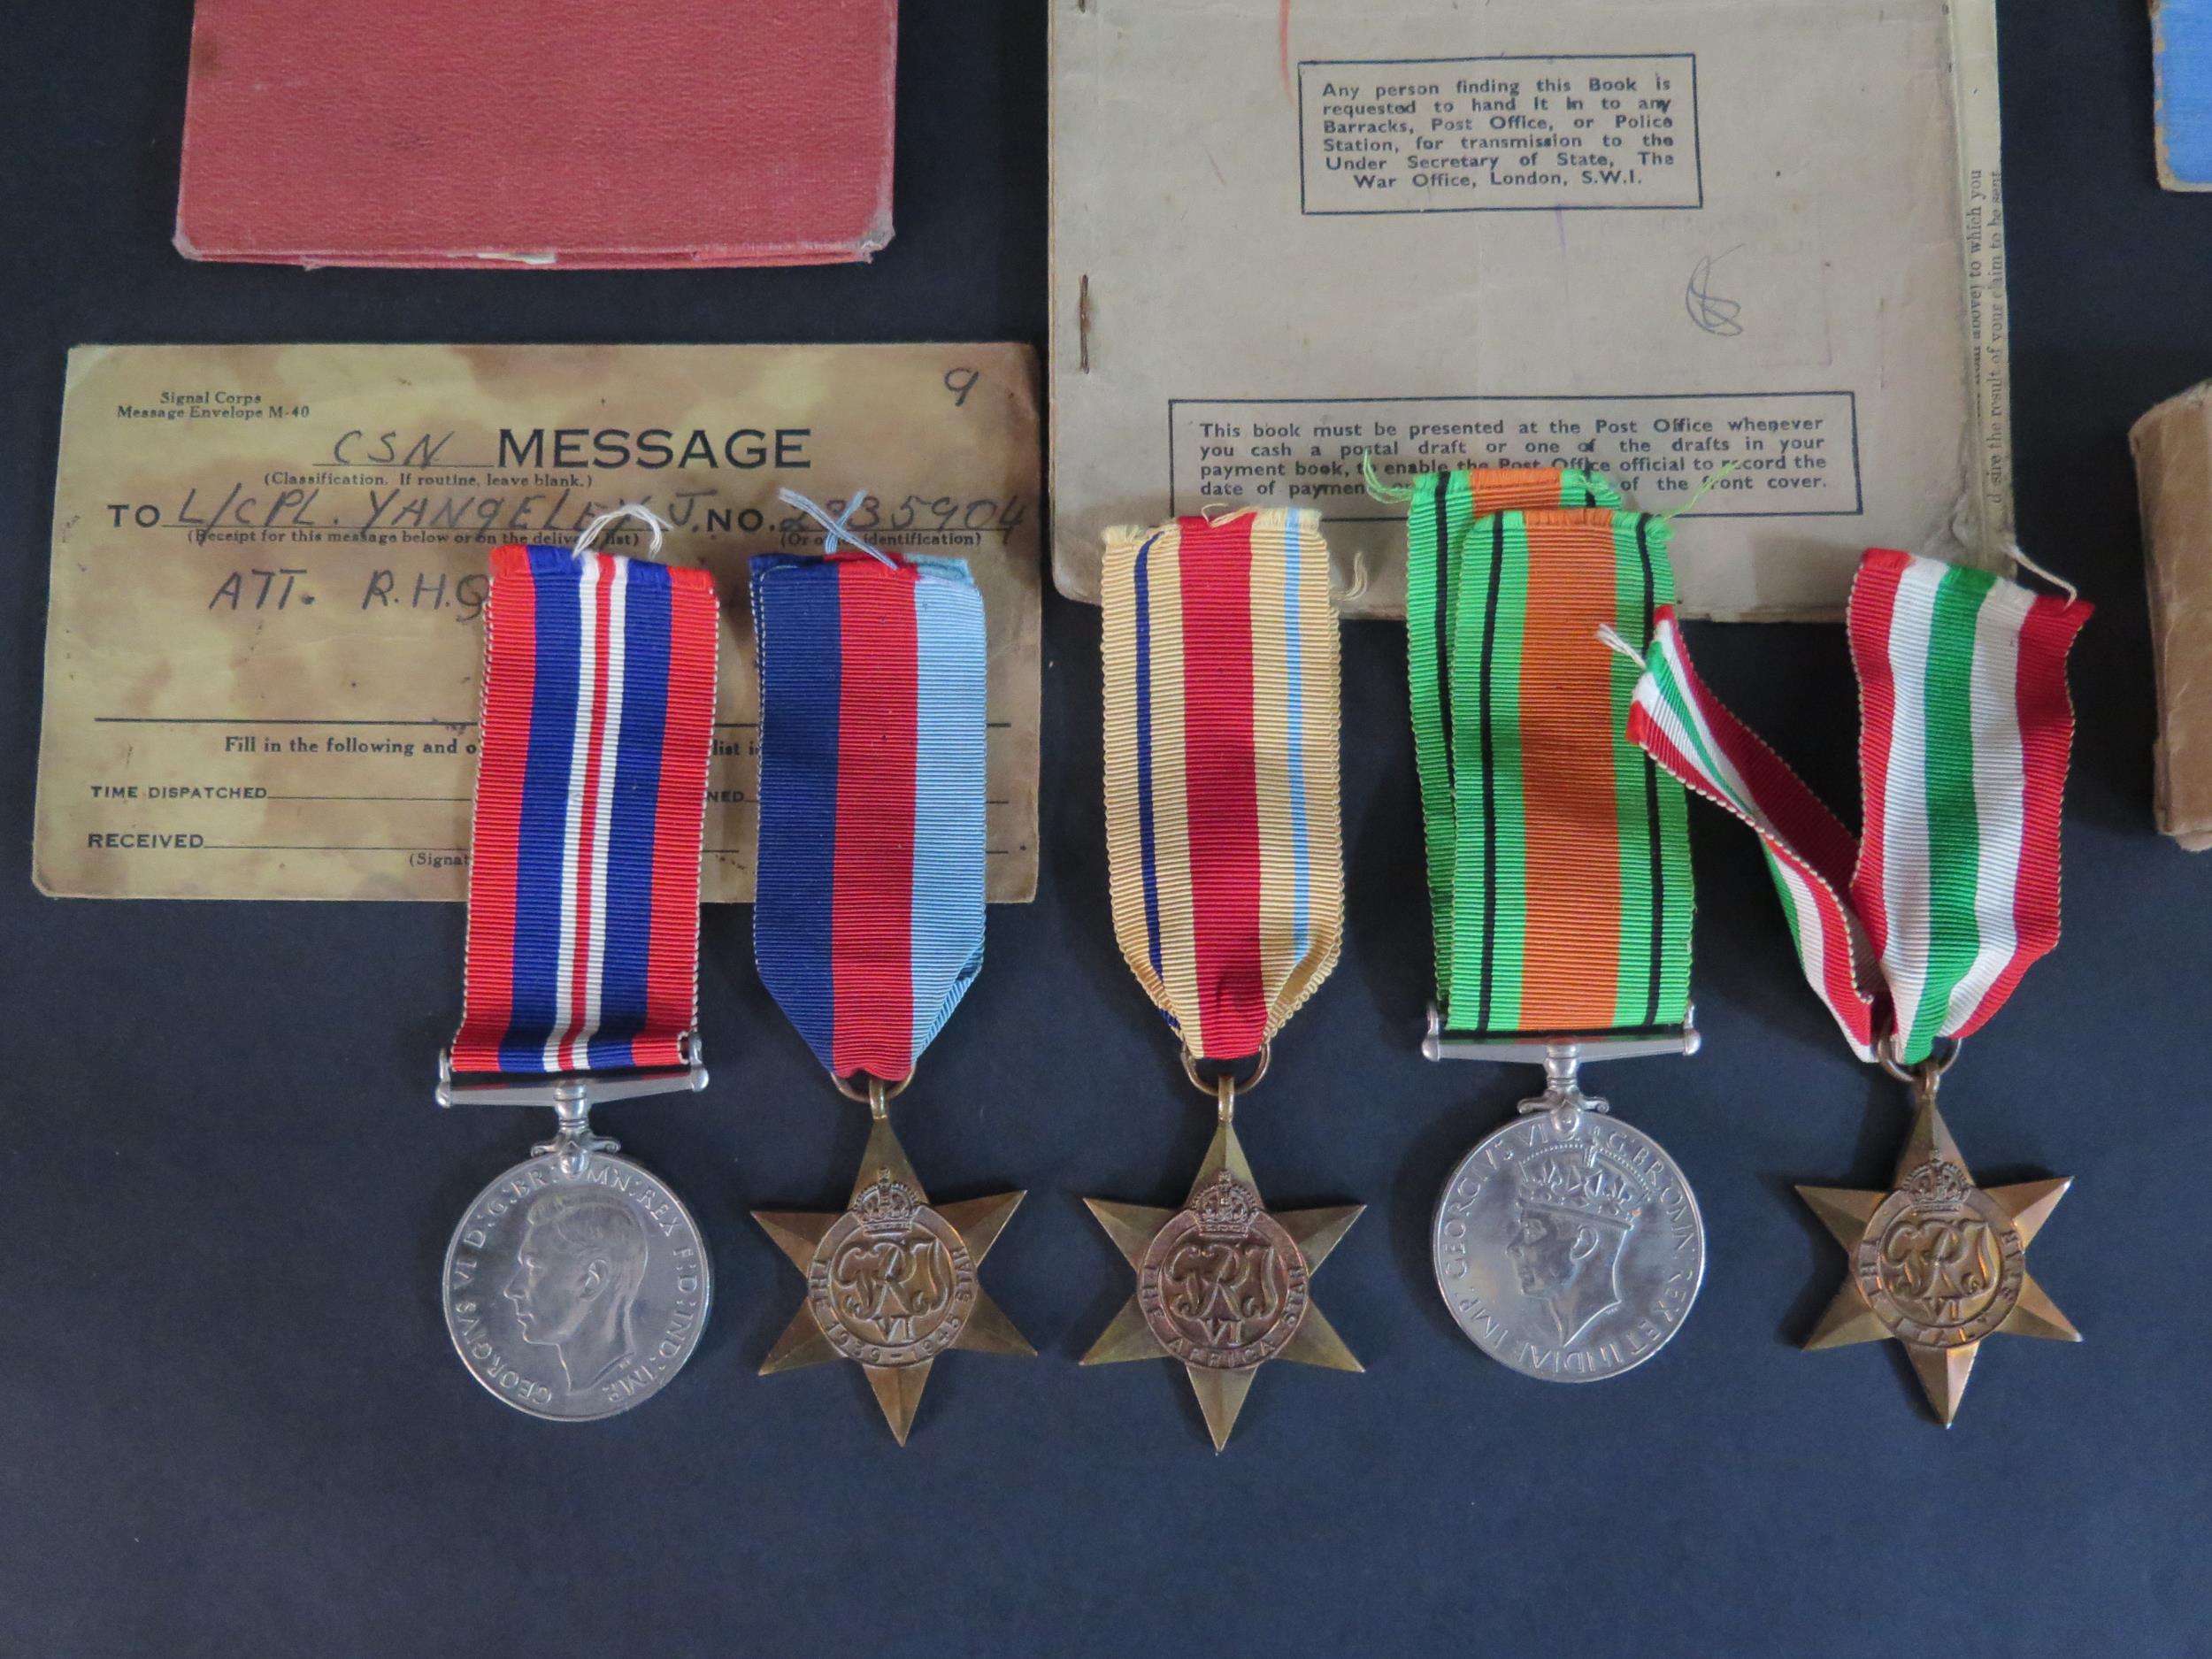 A WWII Five Medal Group including War Medal, Defence Medal, 1939-45 Star, Africa Star and Italy Star - Image 2 of 3